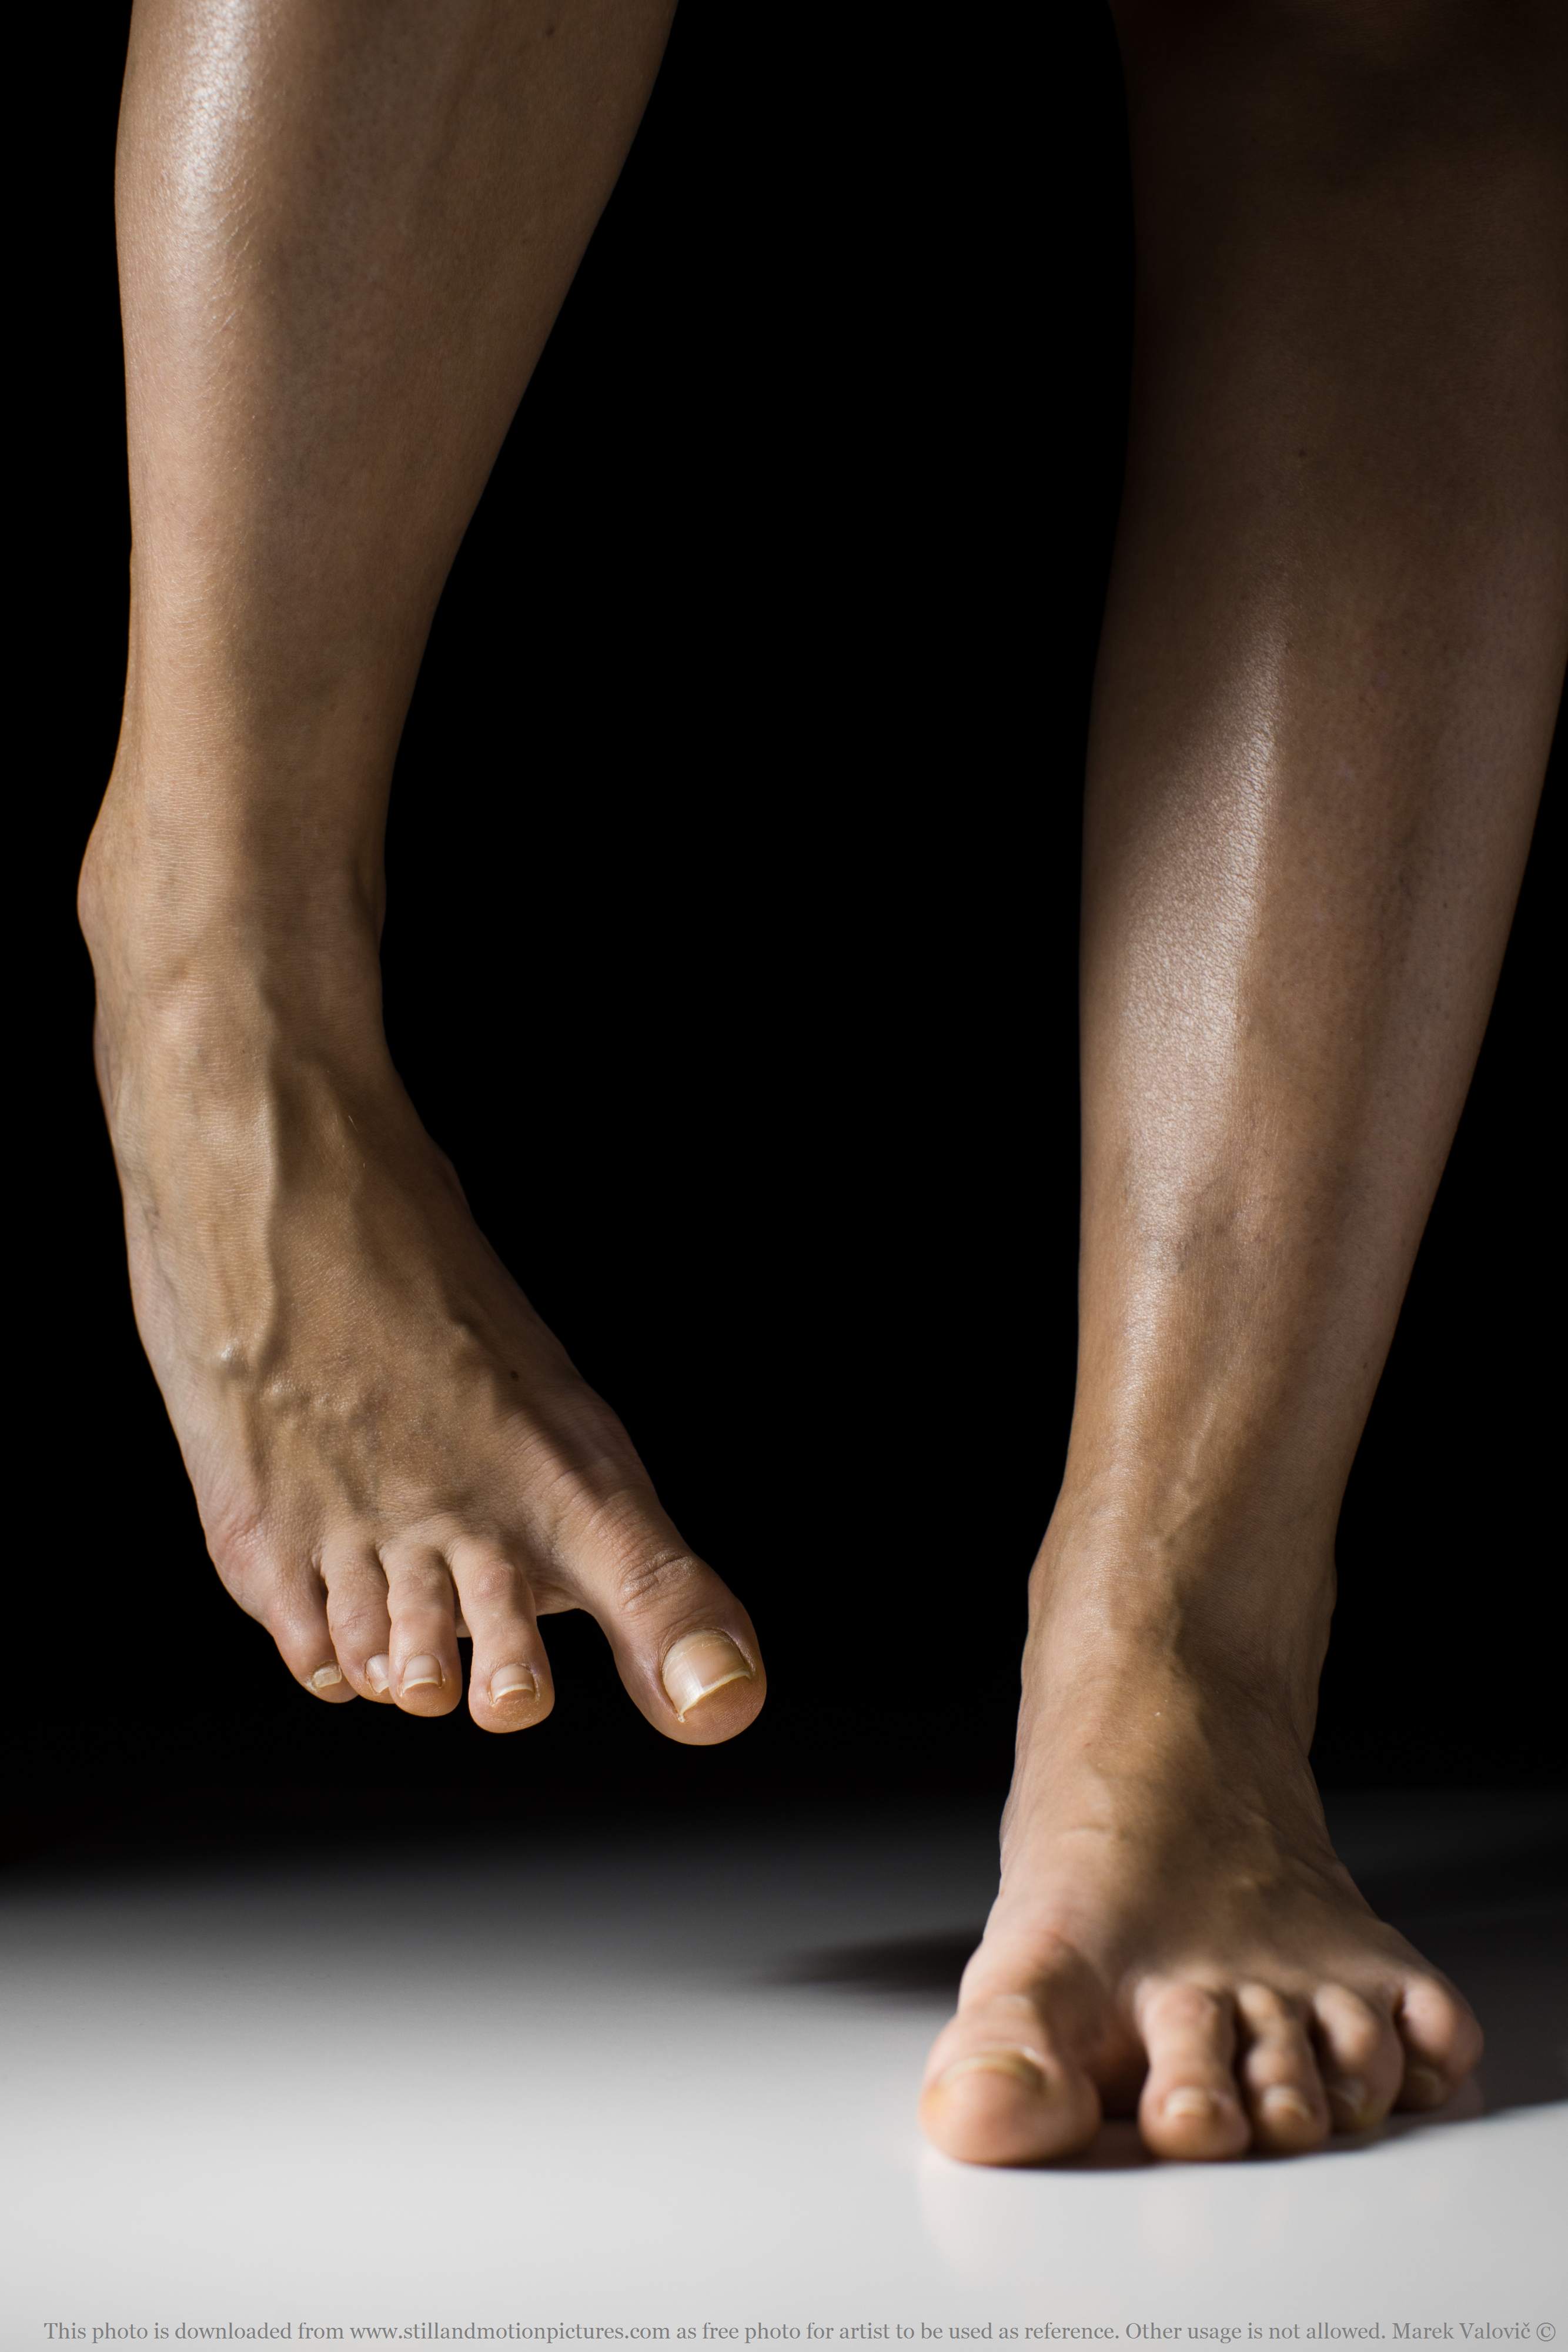 feet anatomy - woman's feet with veins visible - freereference photo for artists